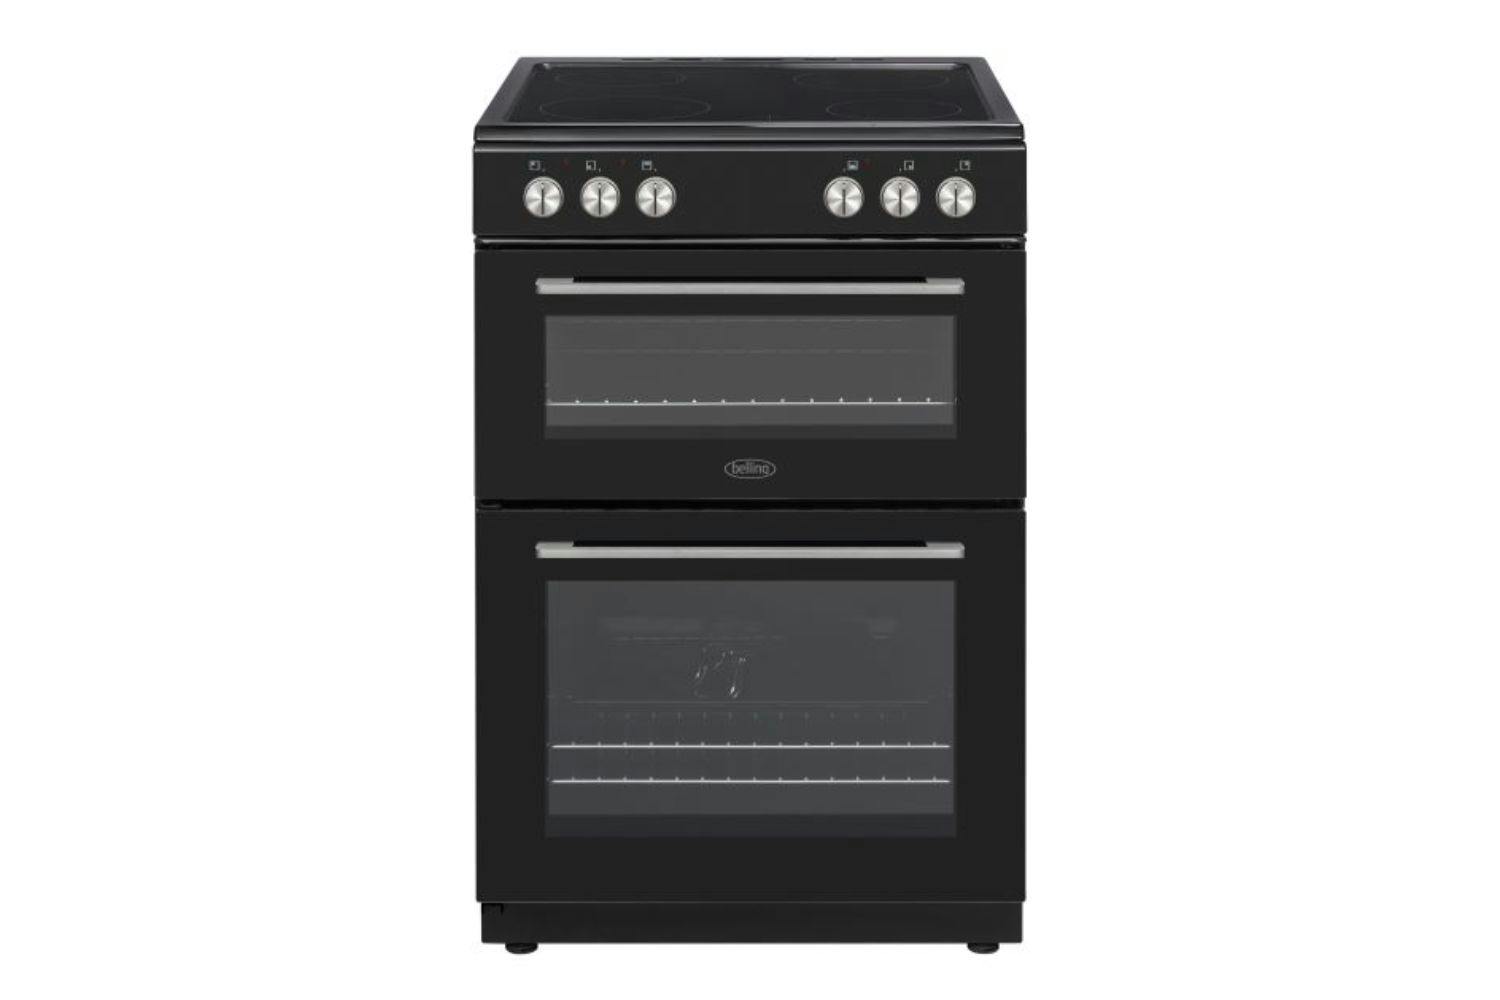 Belling 60cm Double Oven Electric Cooker | BFSE61DOBK